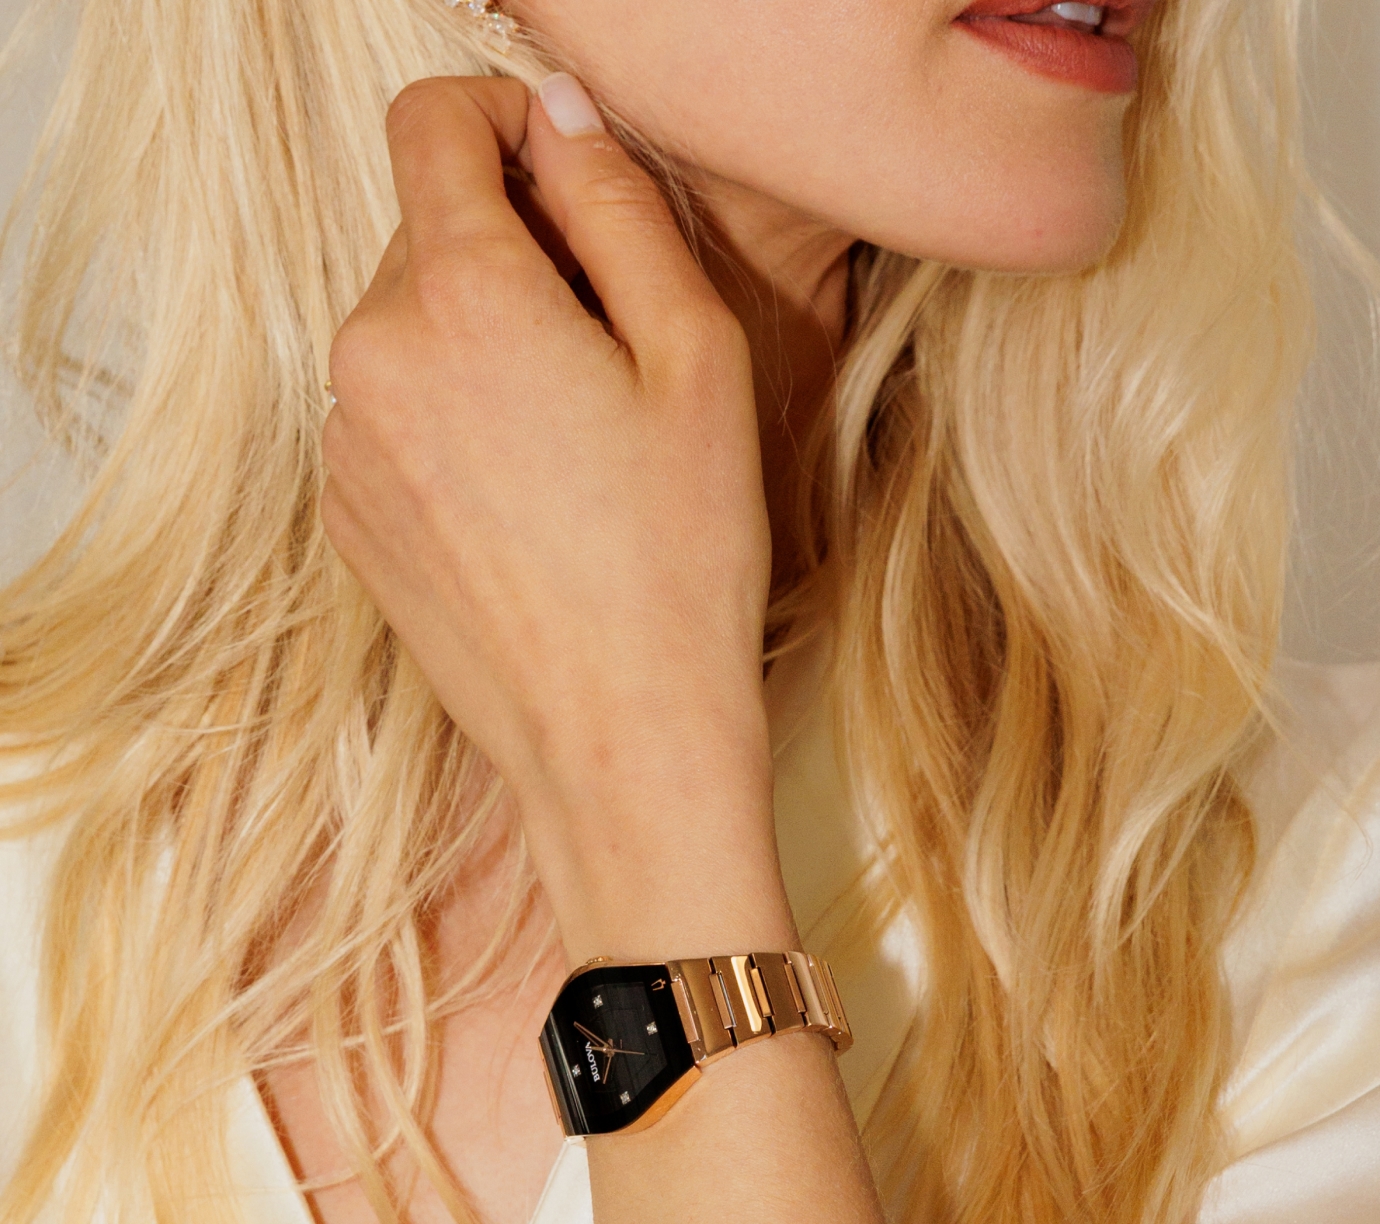 Women's Watches - Cherish your time in style with our captivating women's watches.